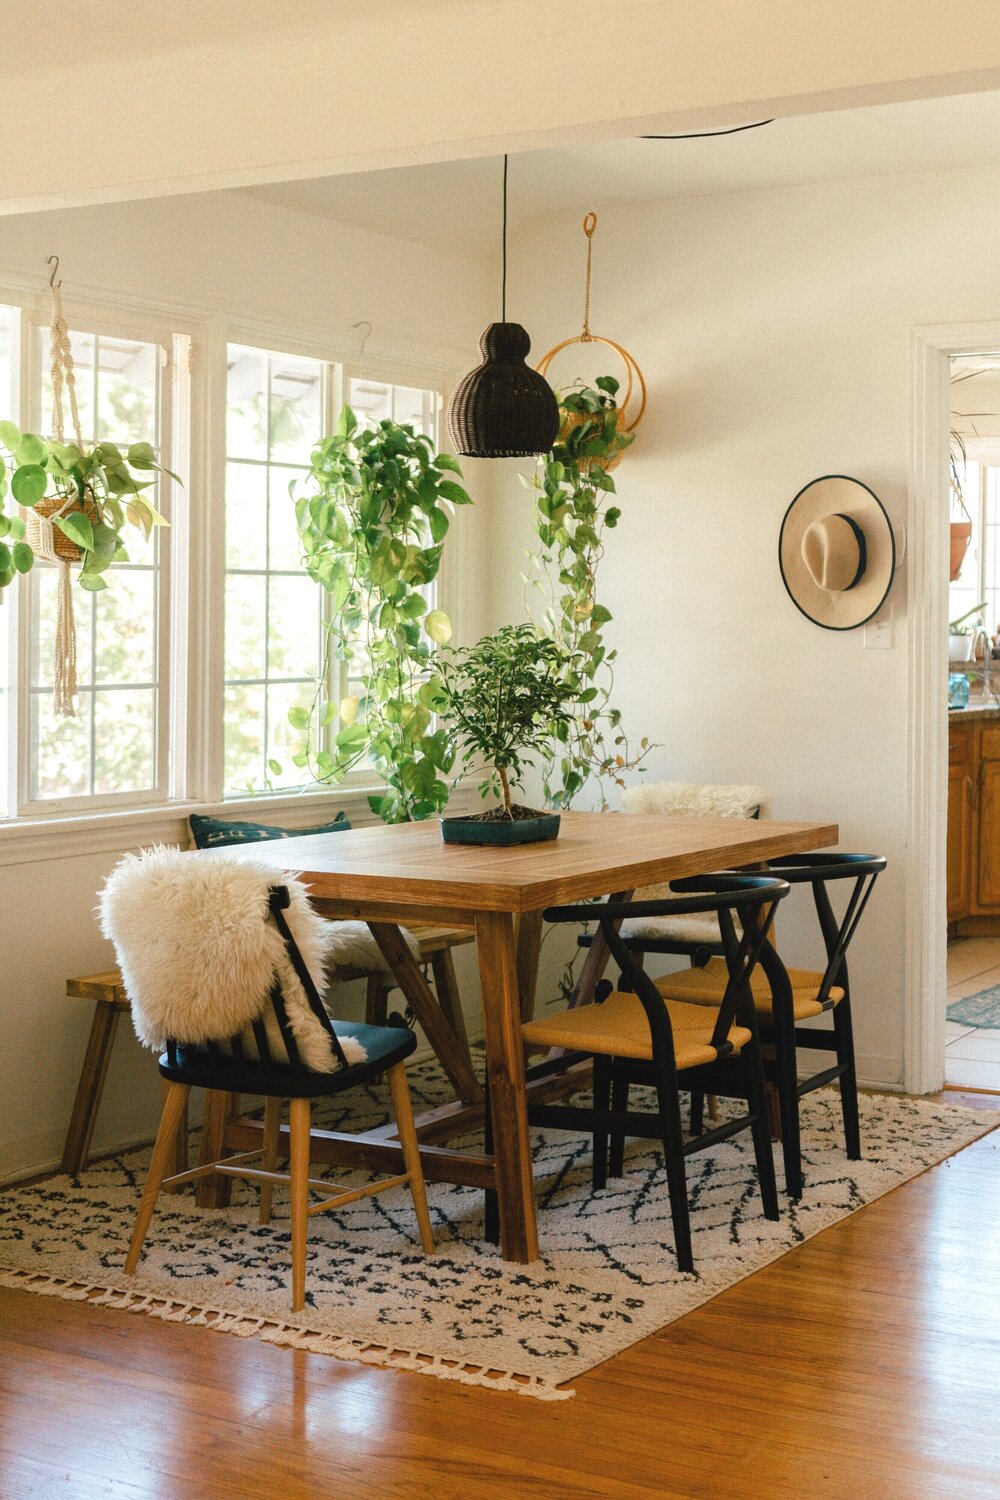 Natural Focal Points in Your Dining Room